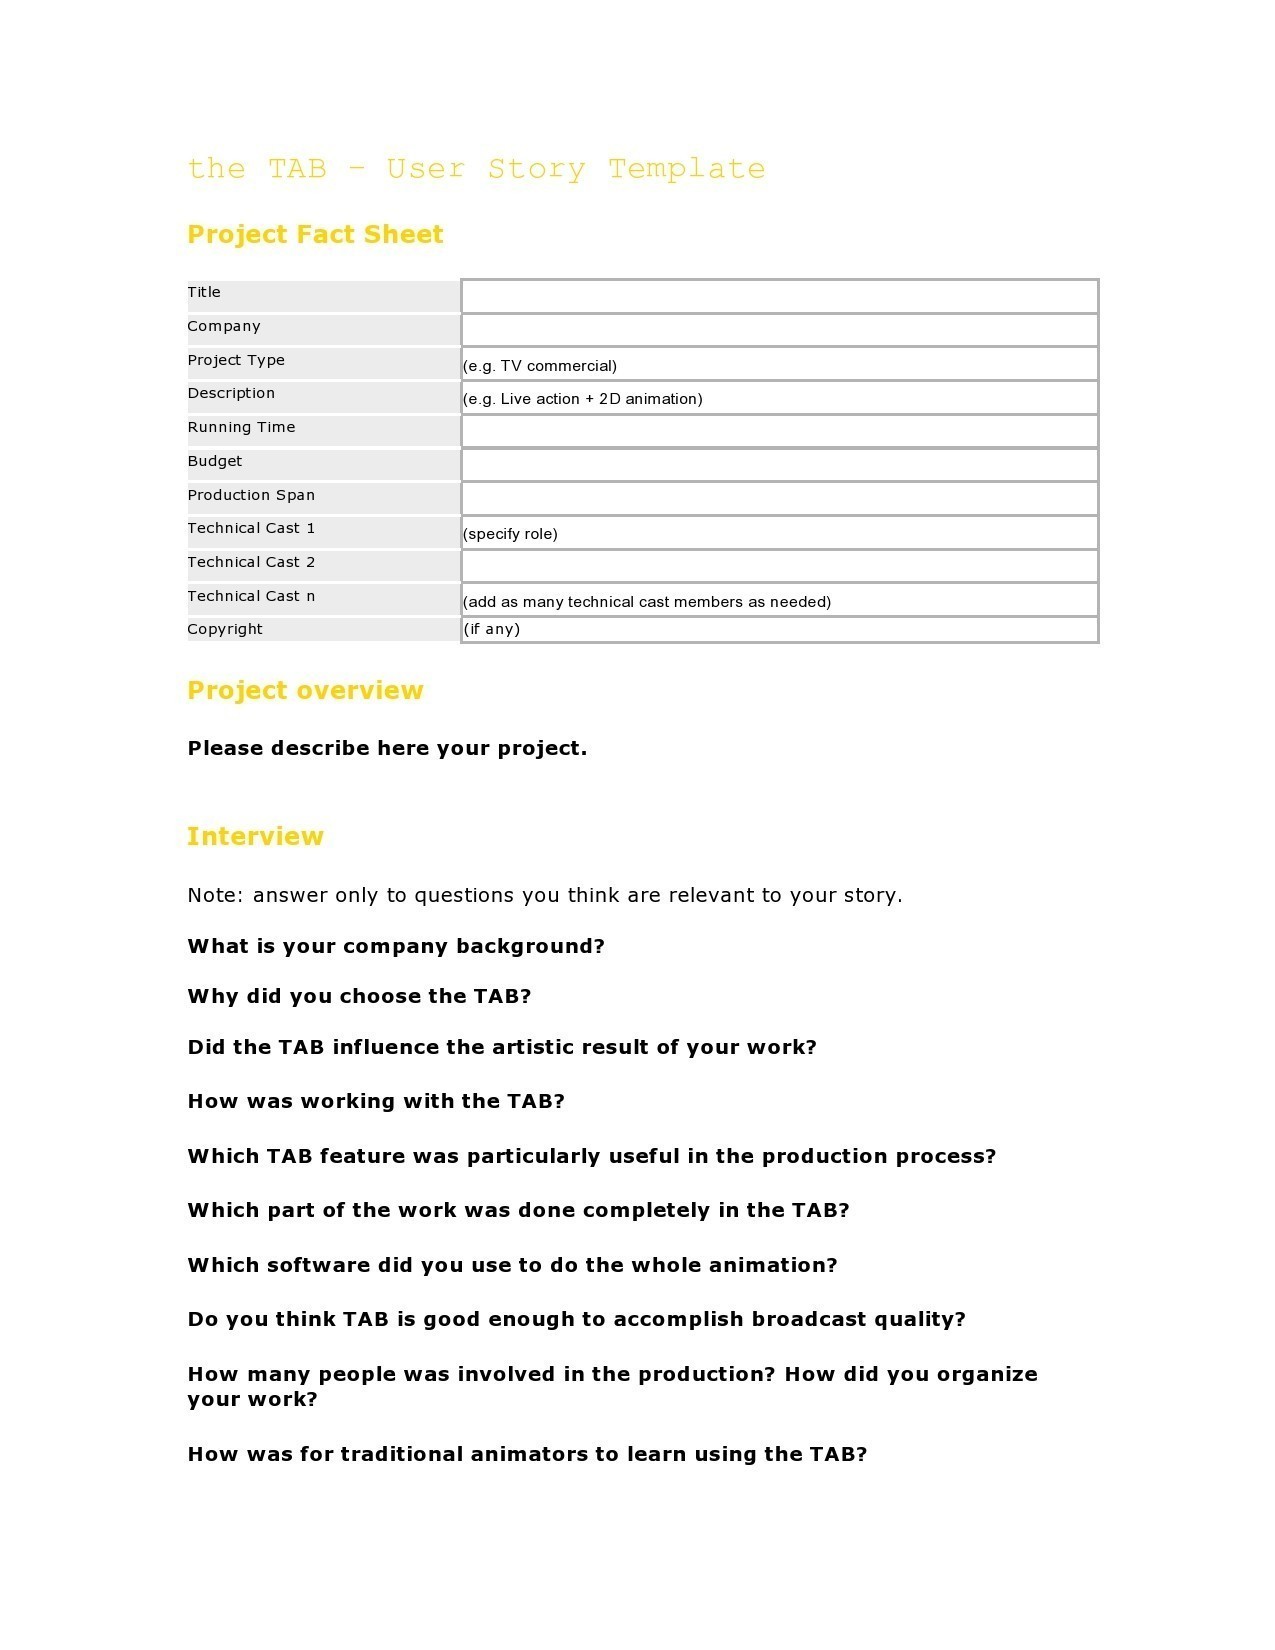 Free user story template 06